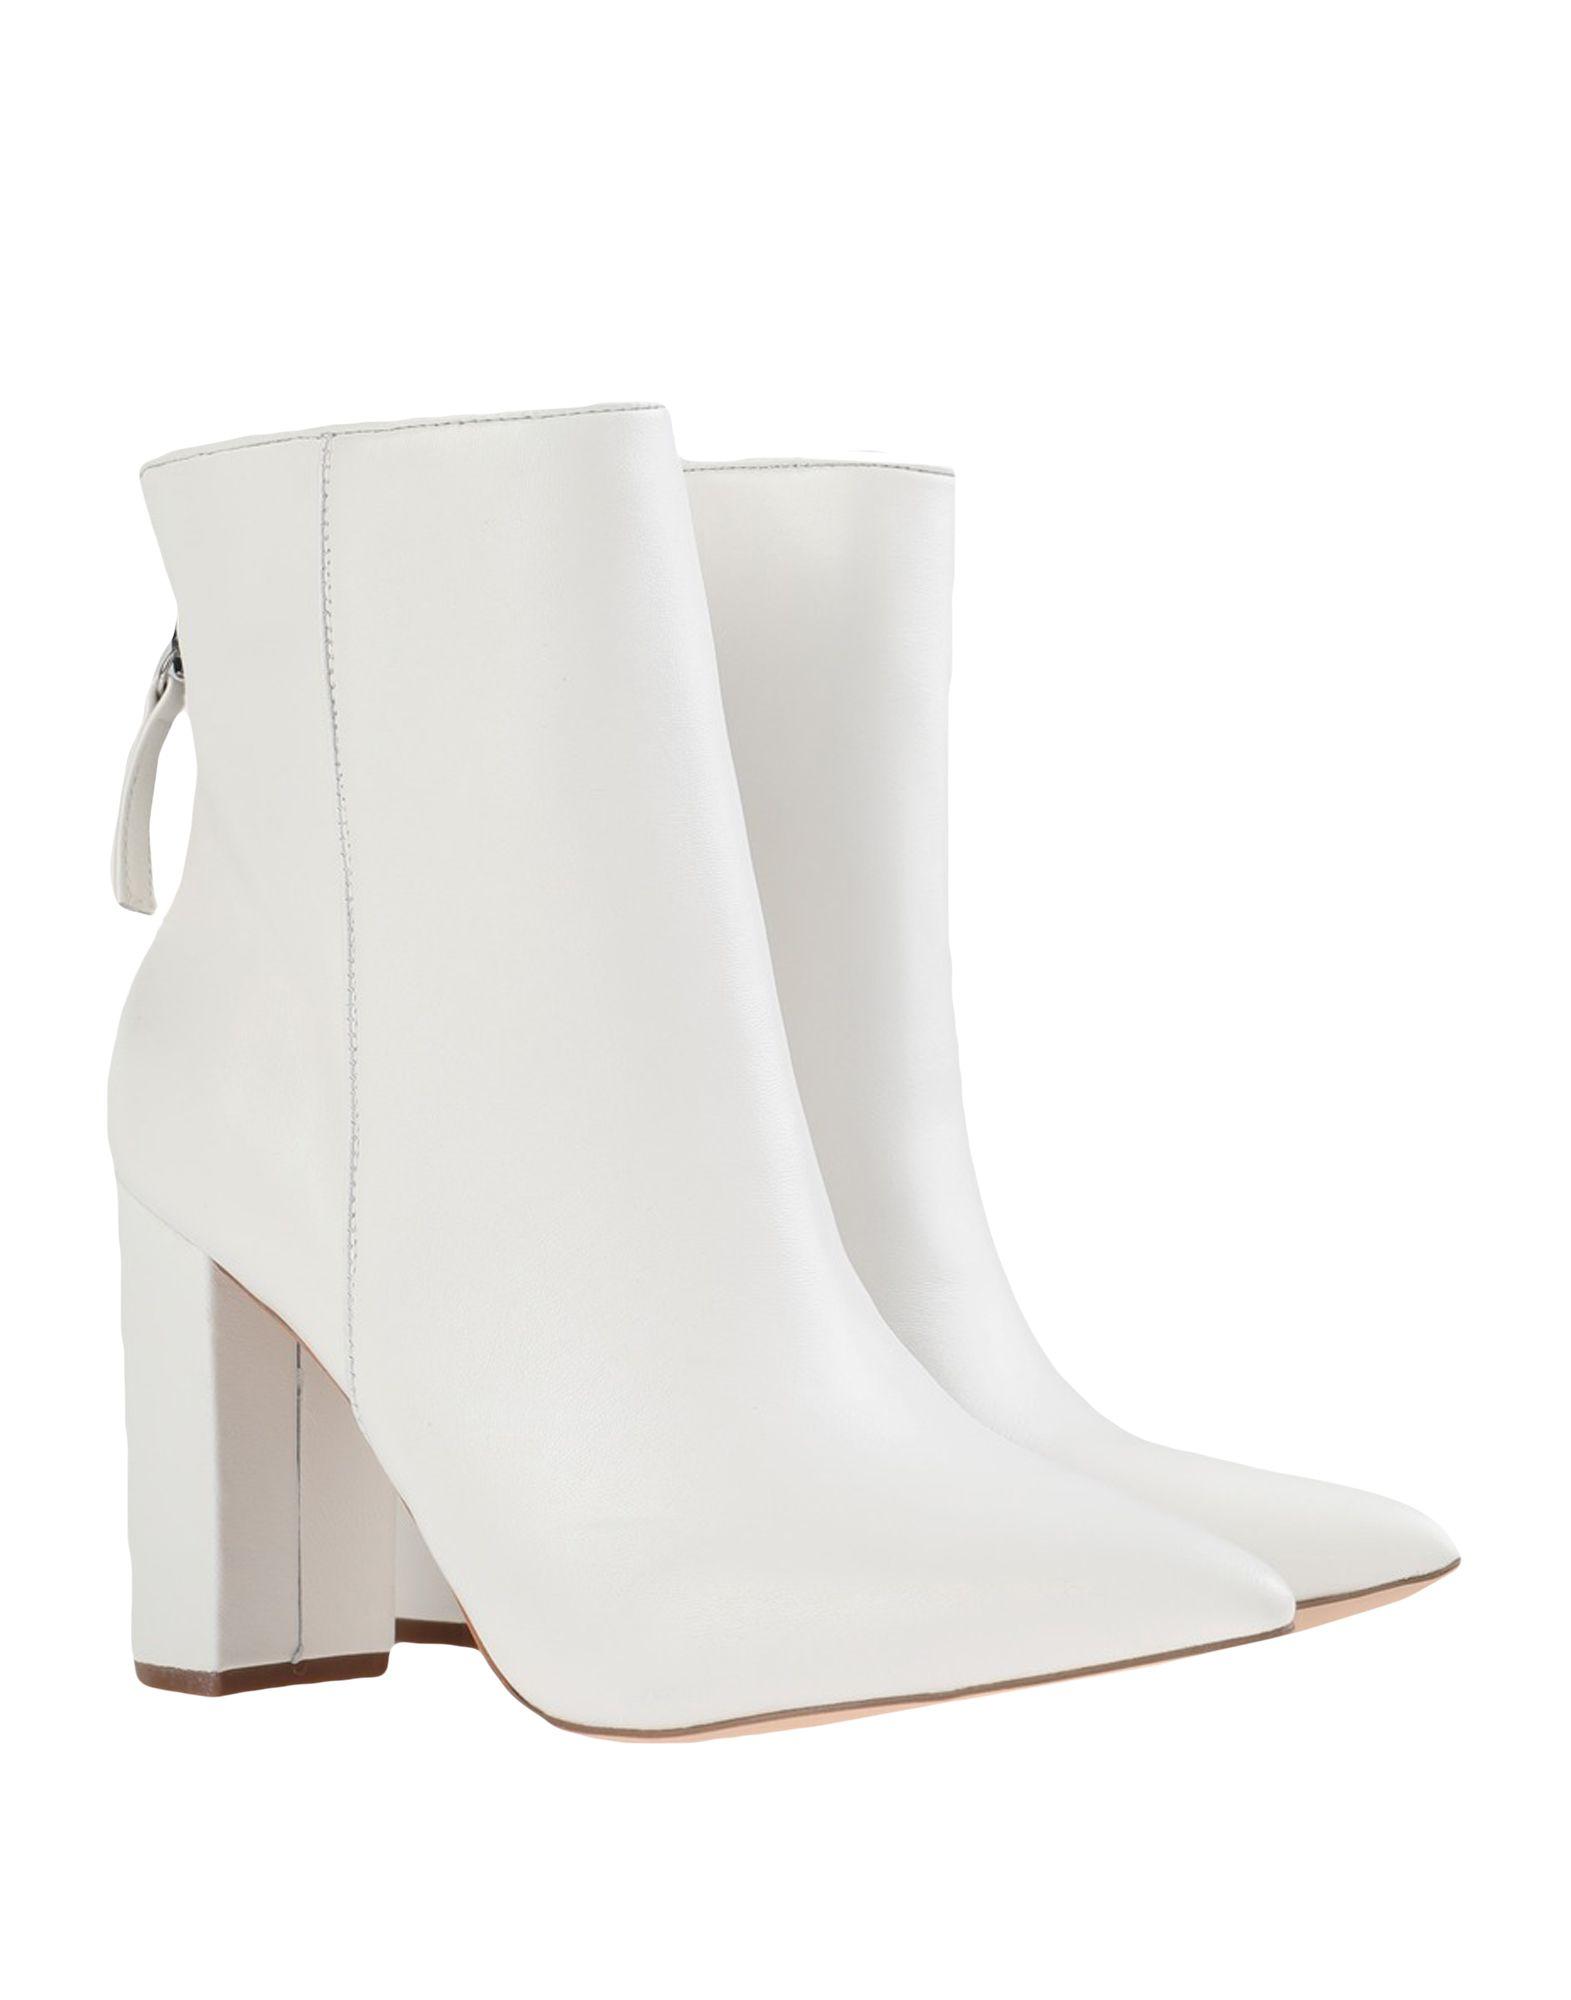 Steve Madden Ankle Boots in White - Lyst